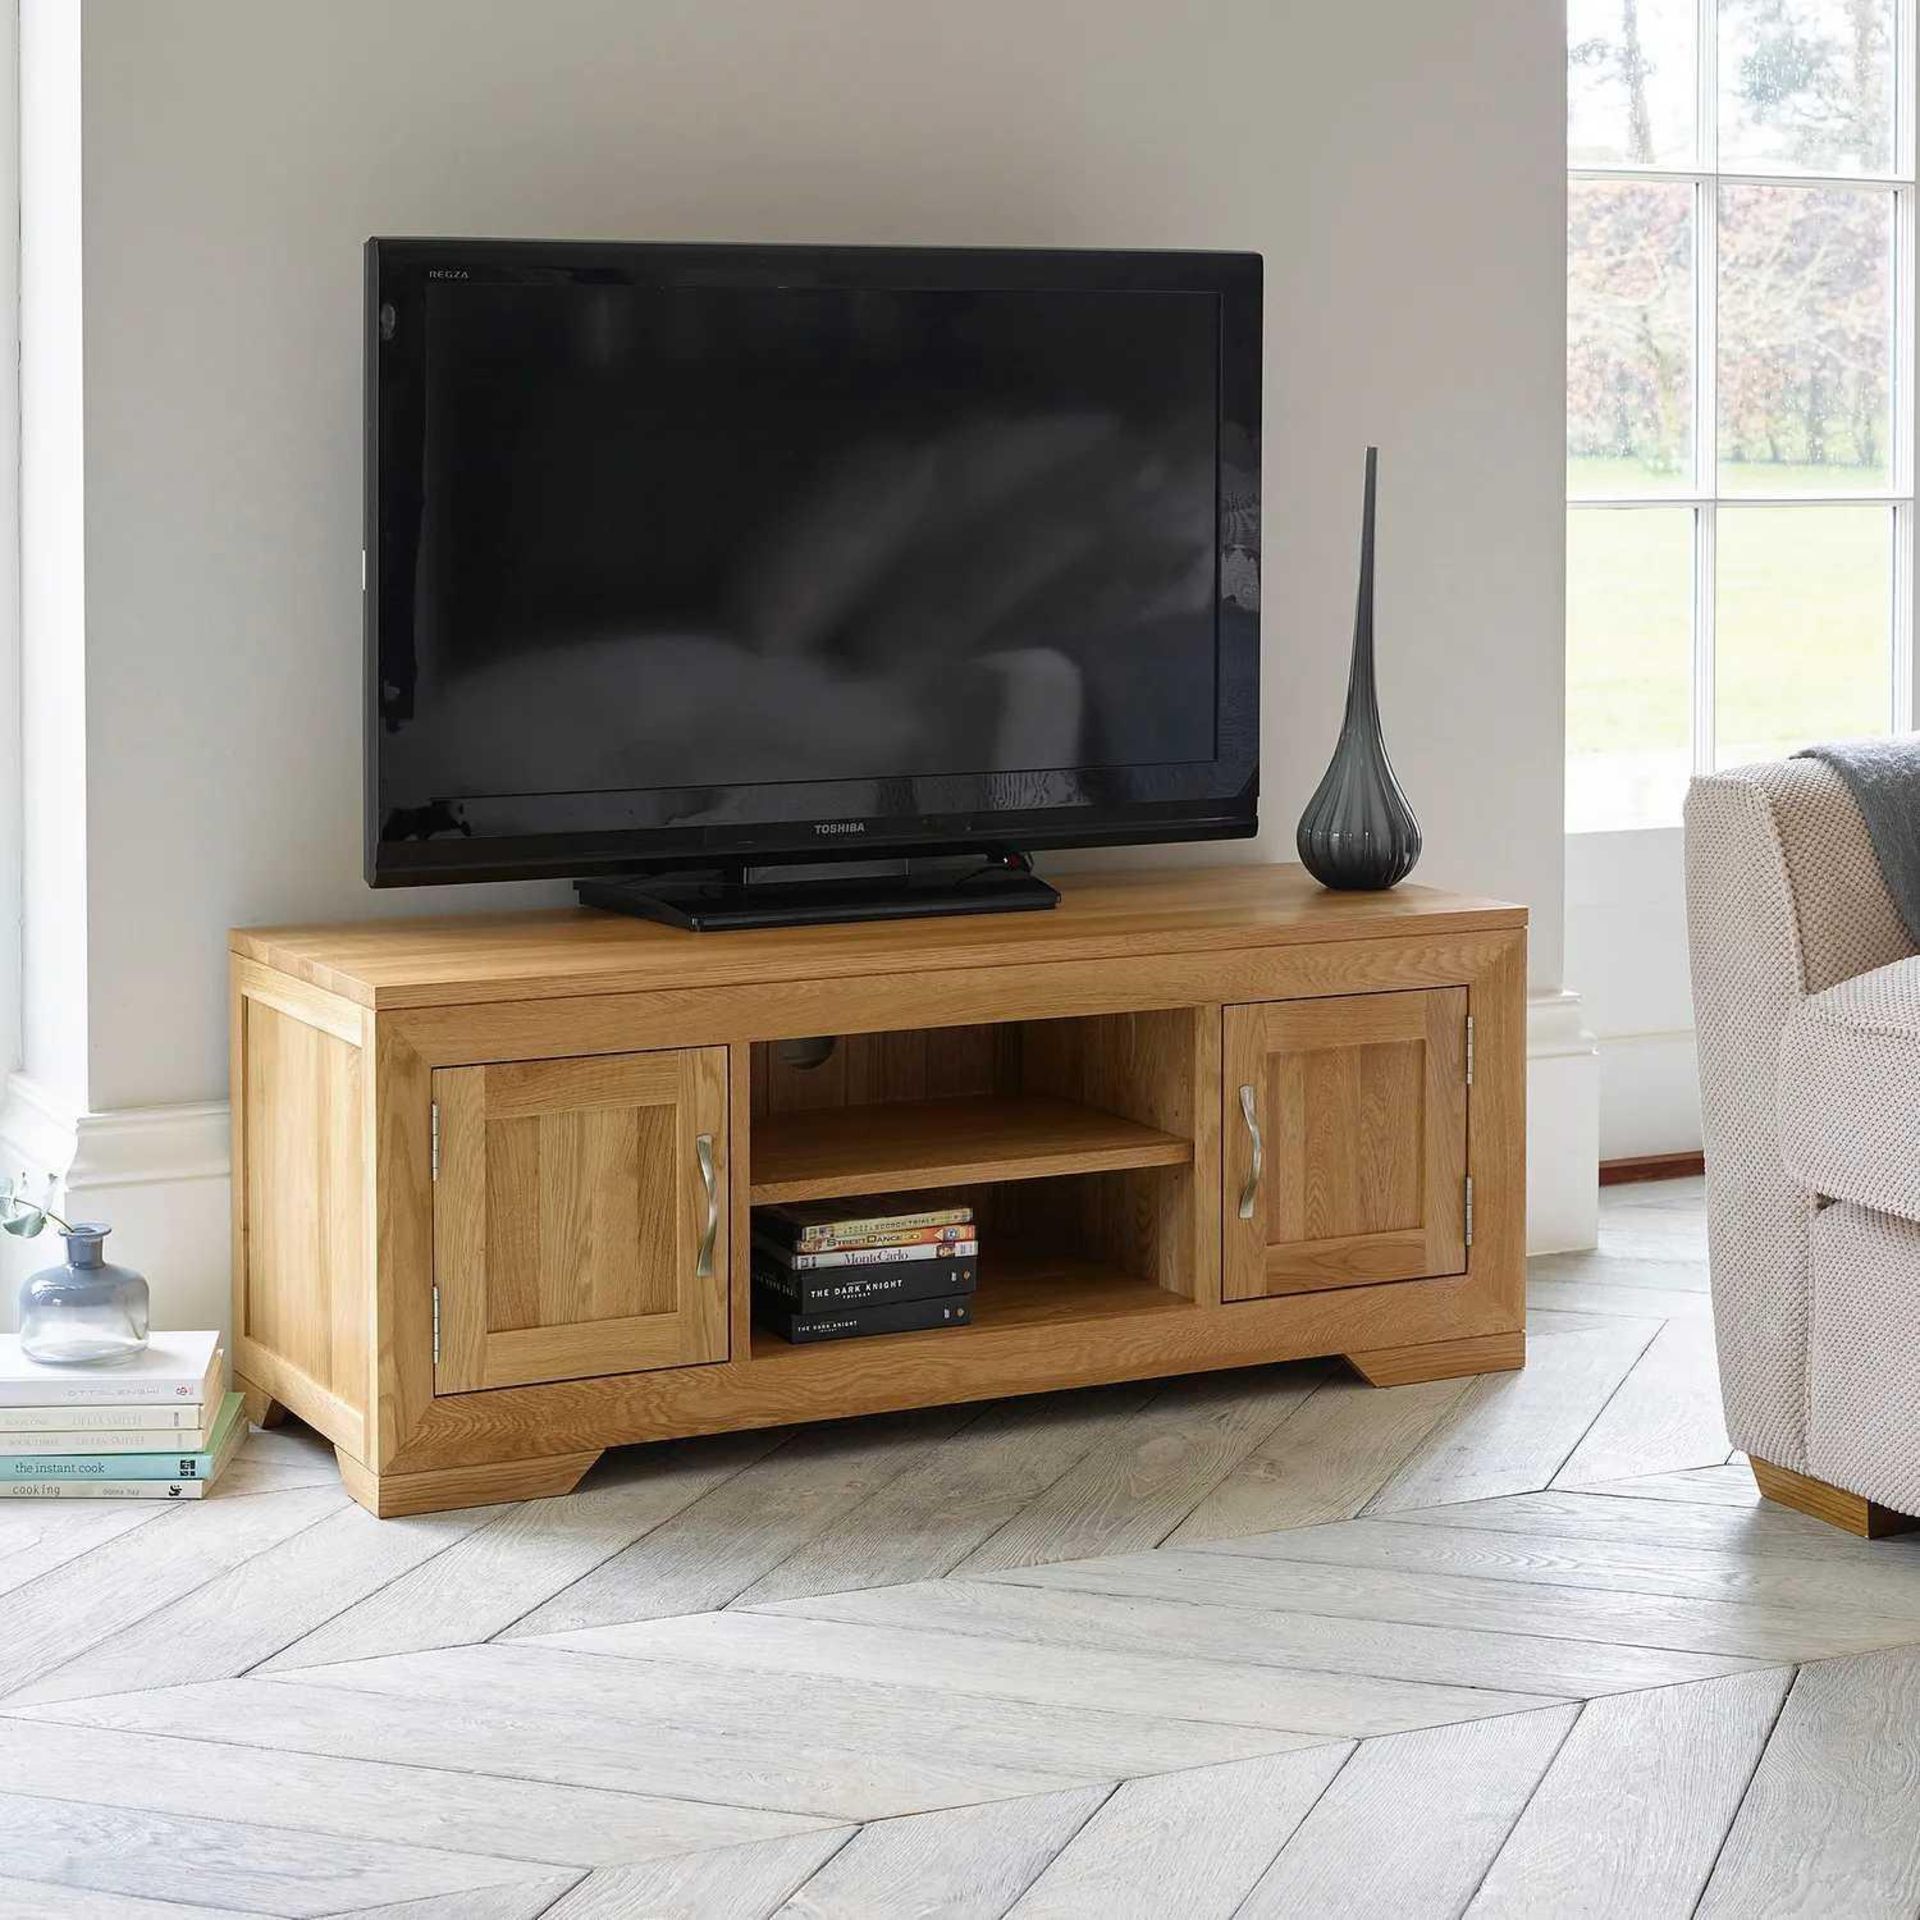 RRP £250. Boxed Oak Tv Stand With Middle Shelf And 2 Cupboards For Storage.